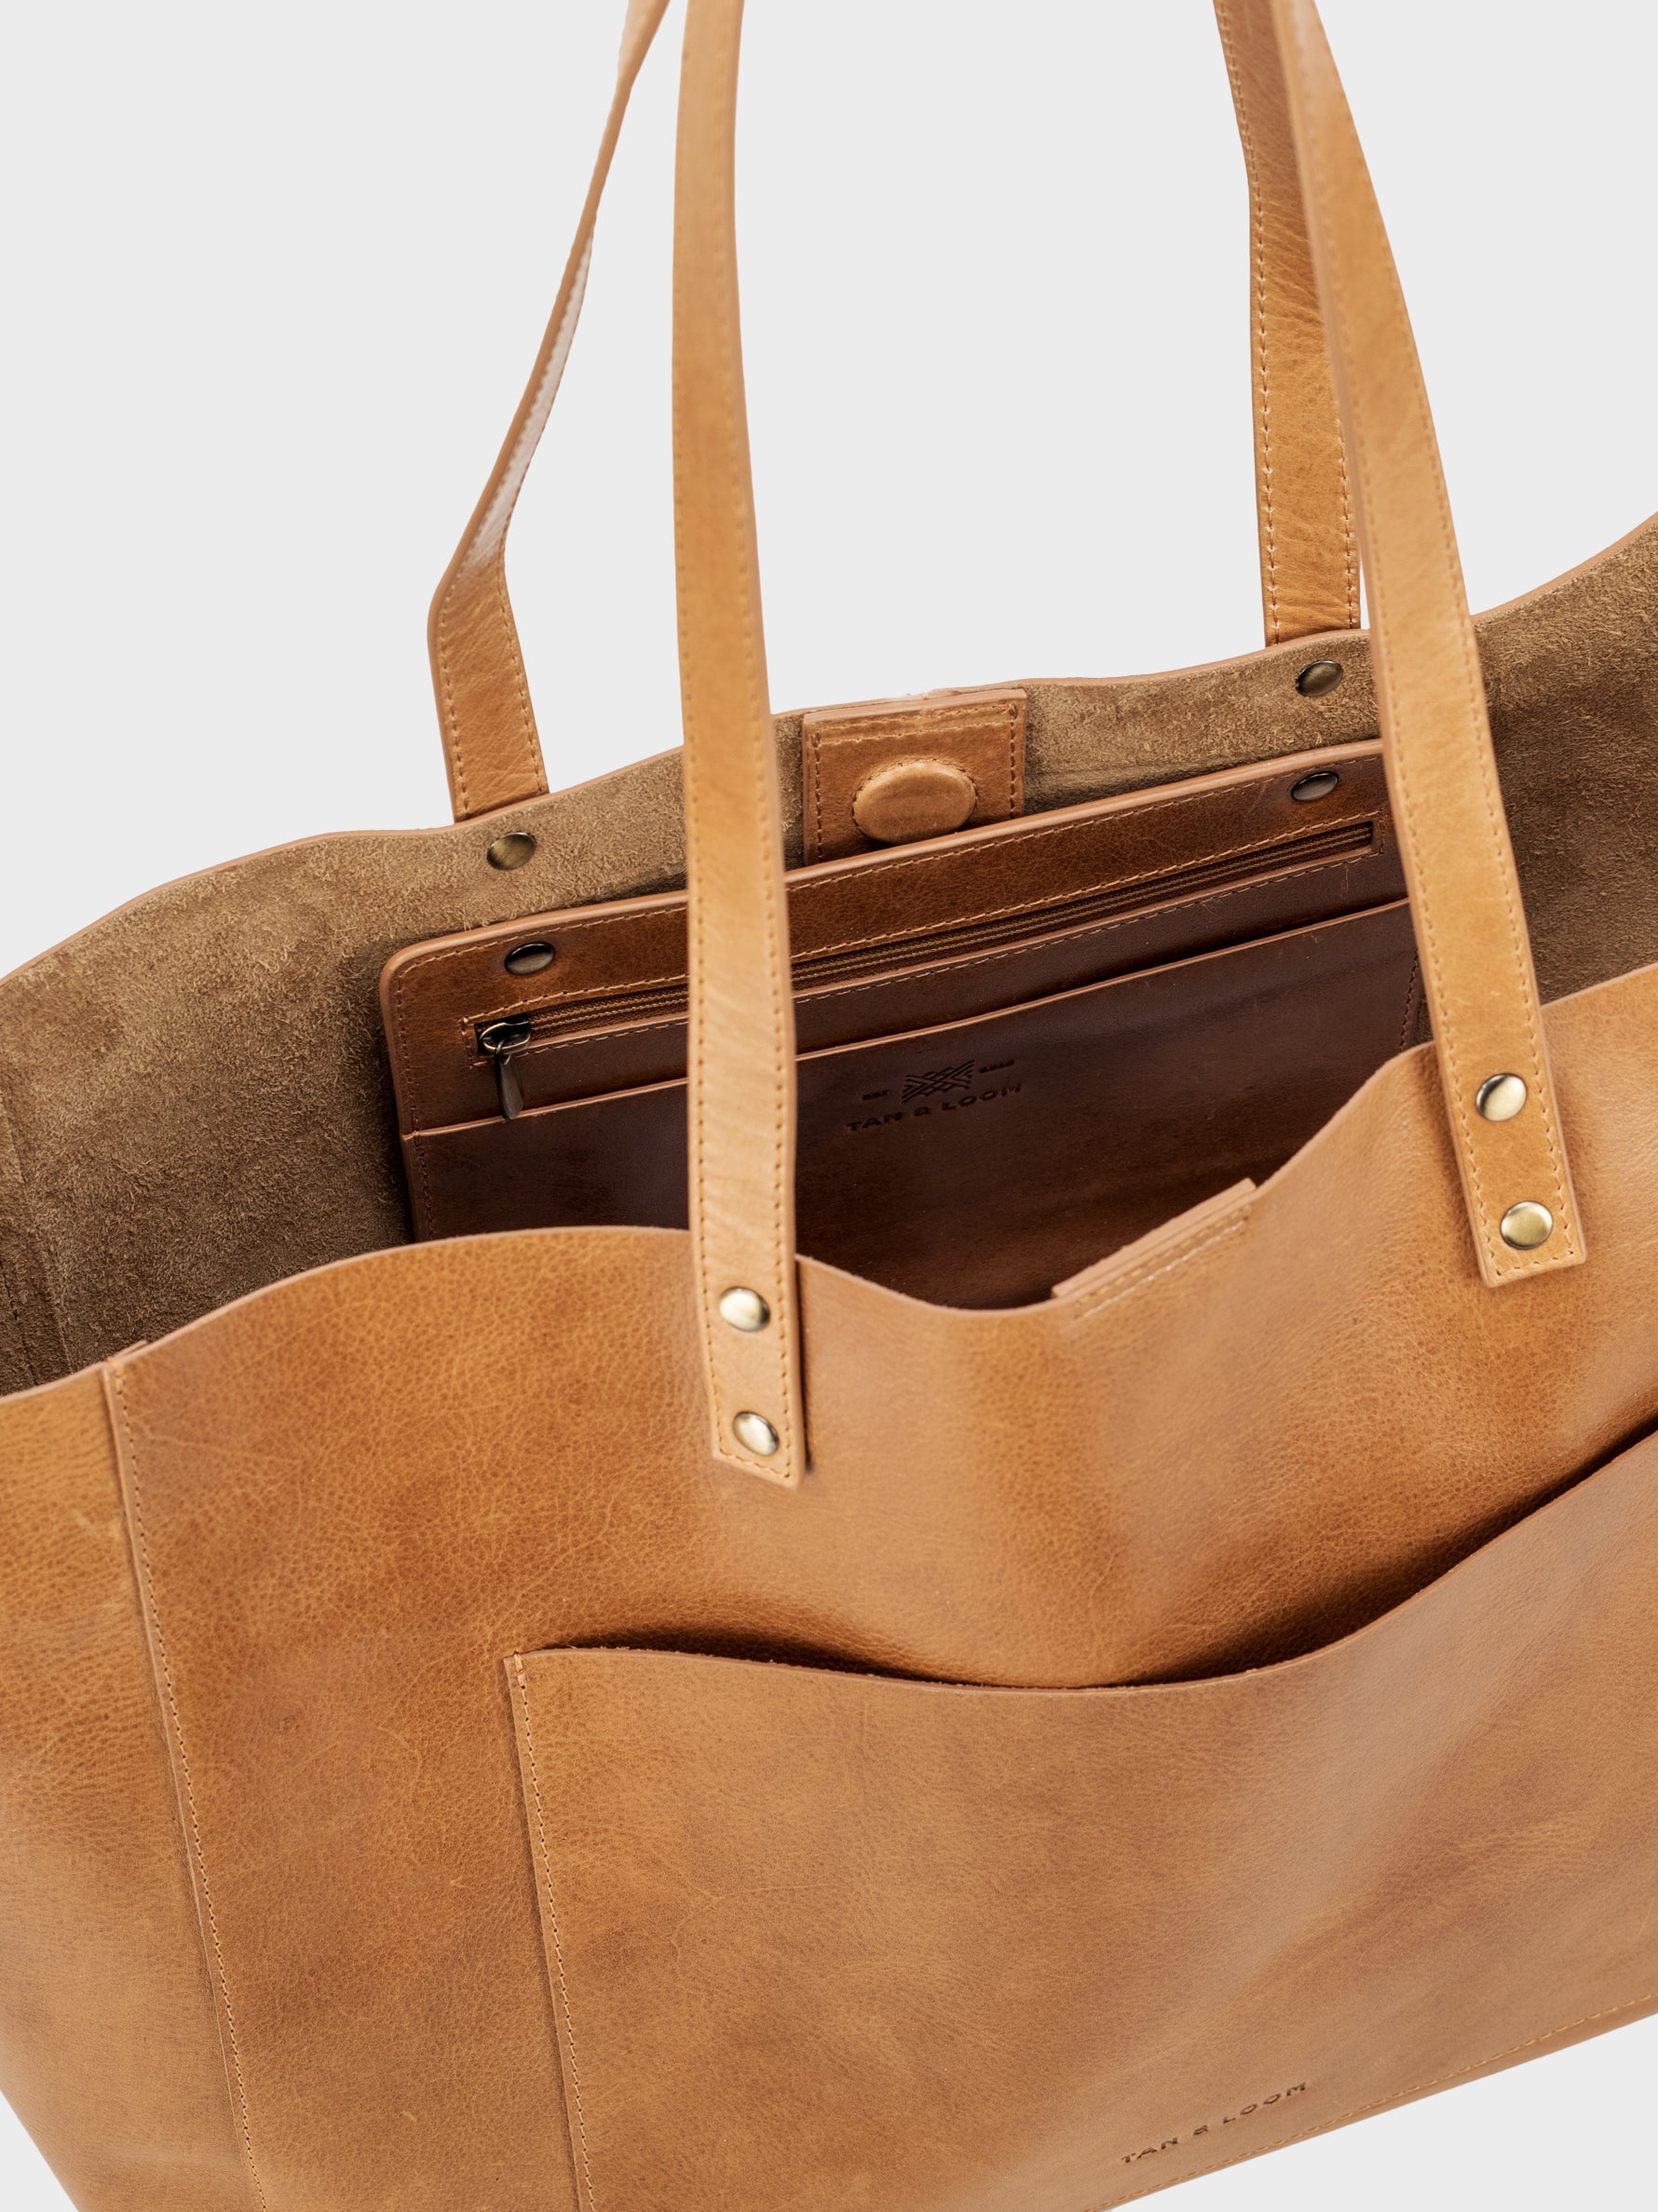 Handcrafted Genuine Vegetable Tanned Leather Old Fashioned Tote Large Tuscany Tan for Women Tan & Loom